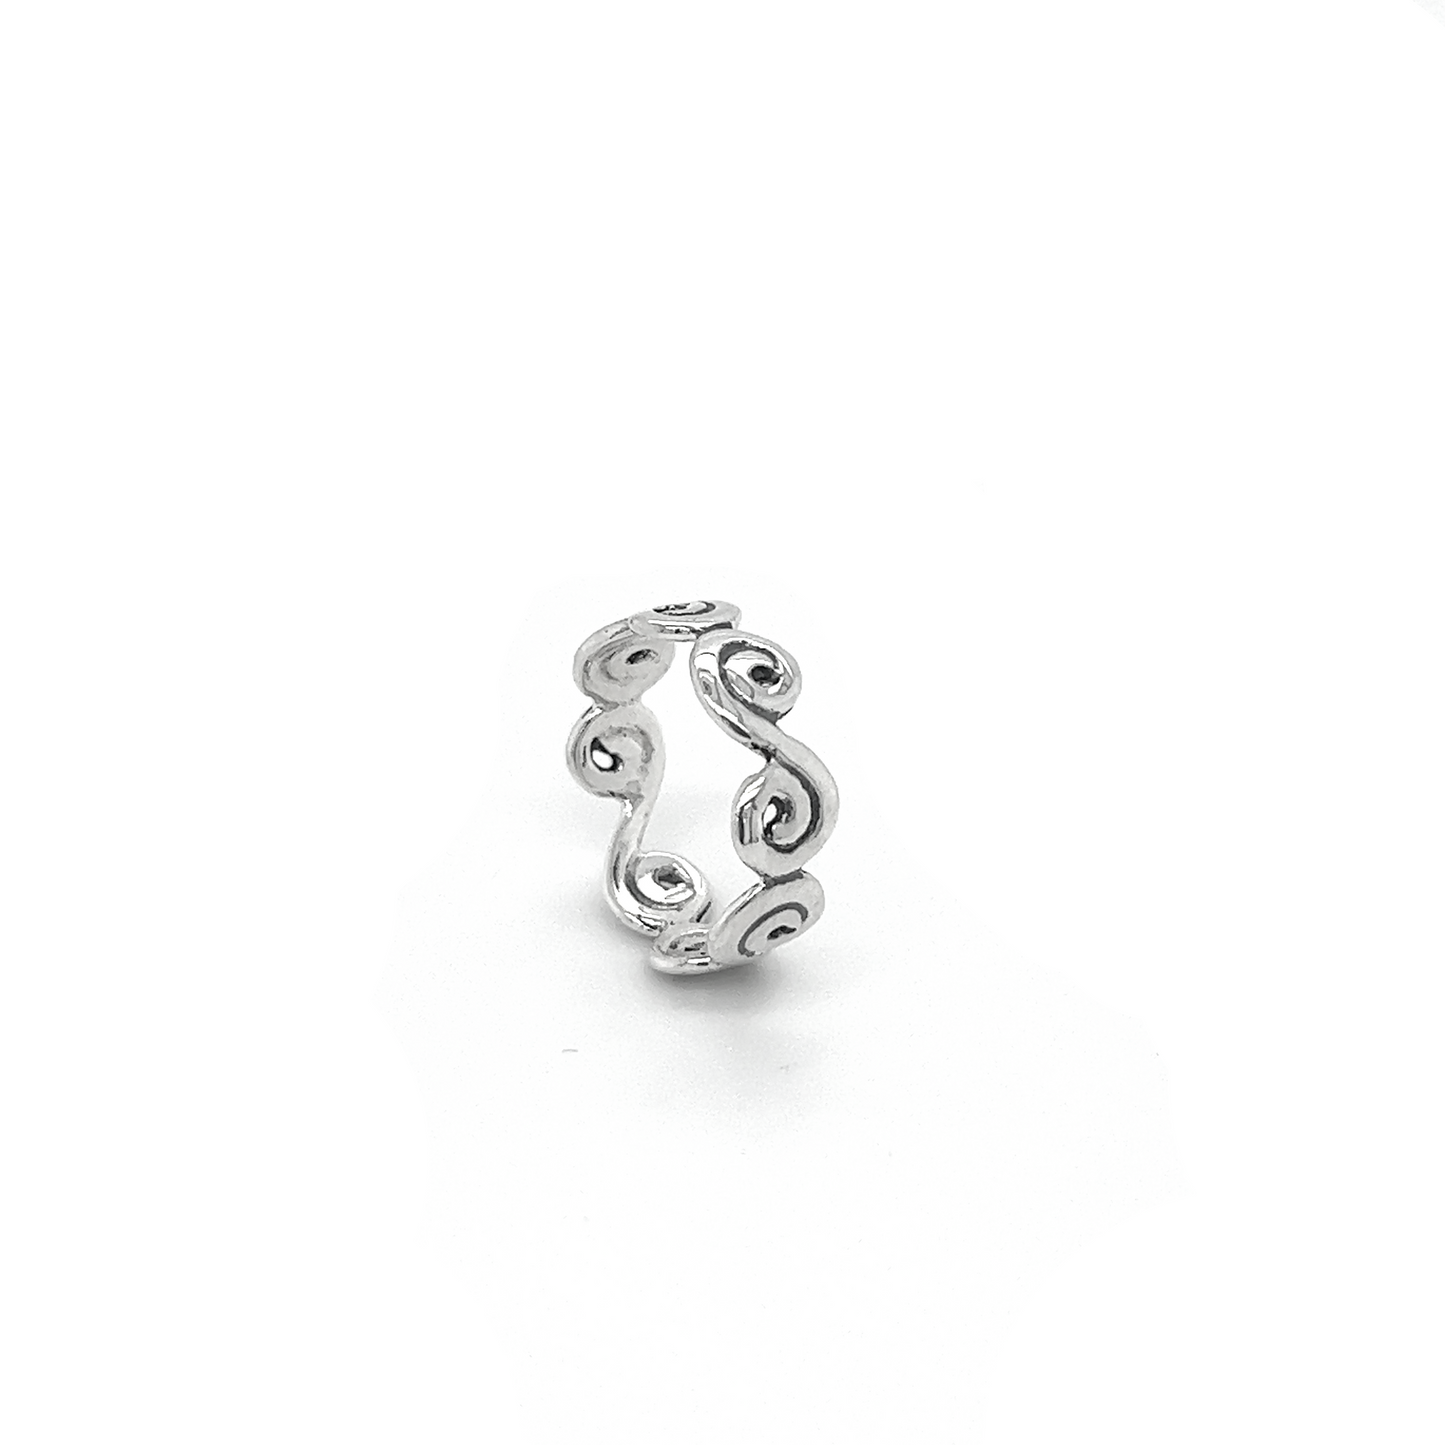 A freestyle silver ring with Wavy Swirl Band.